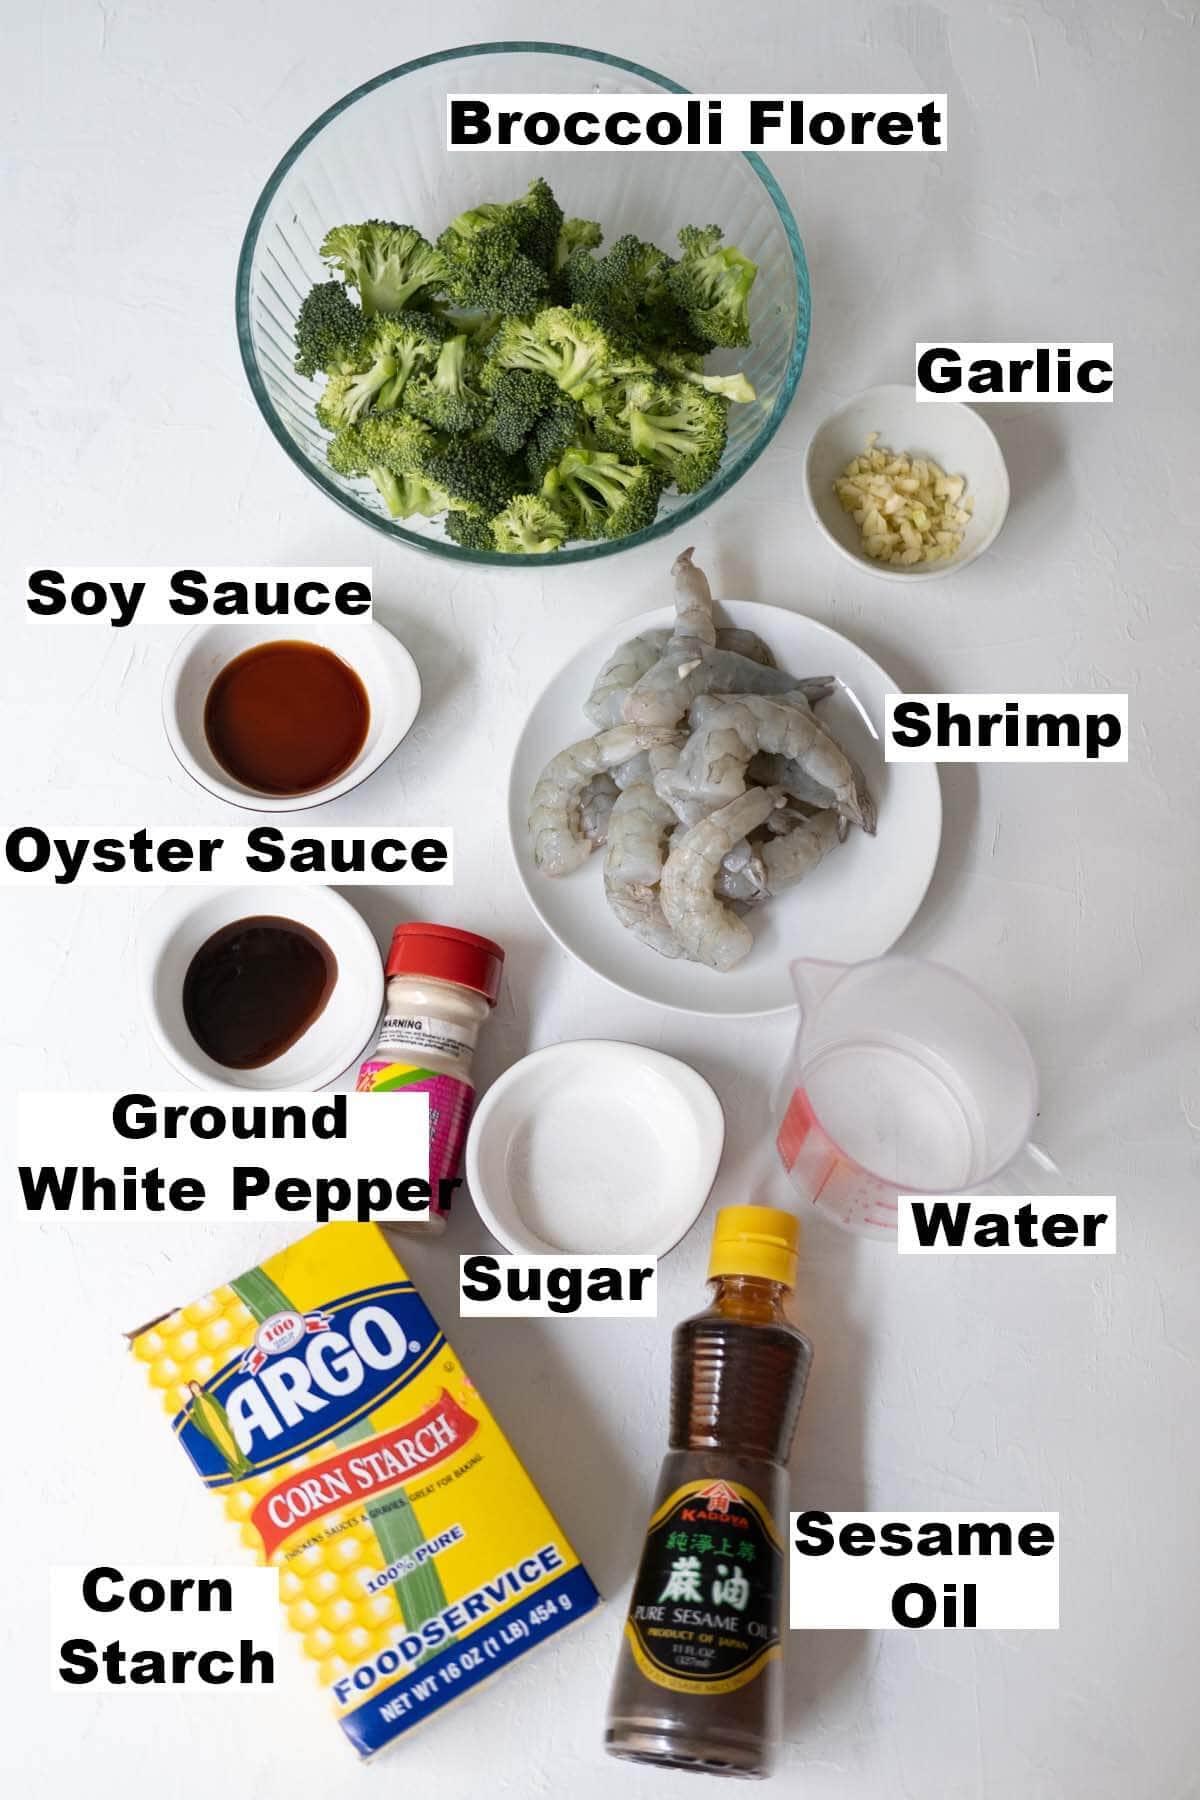 Eleven shrimp and broccoli ingredients: broccoli, shrimp, garlic, soy sauce, oyster sauce, ground white pepper, sugar, water, corn starch, sesame oil. 